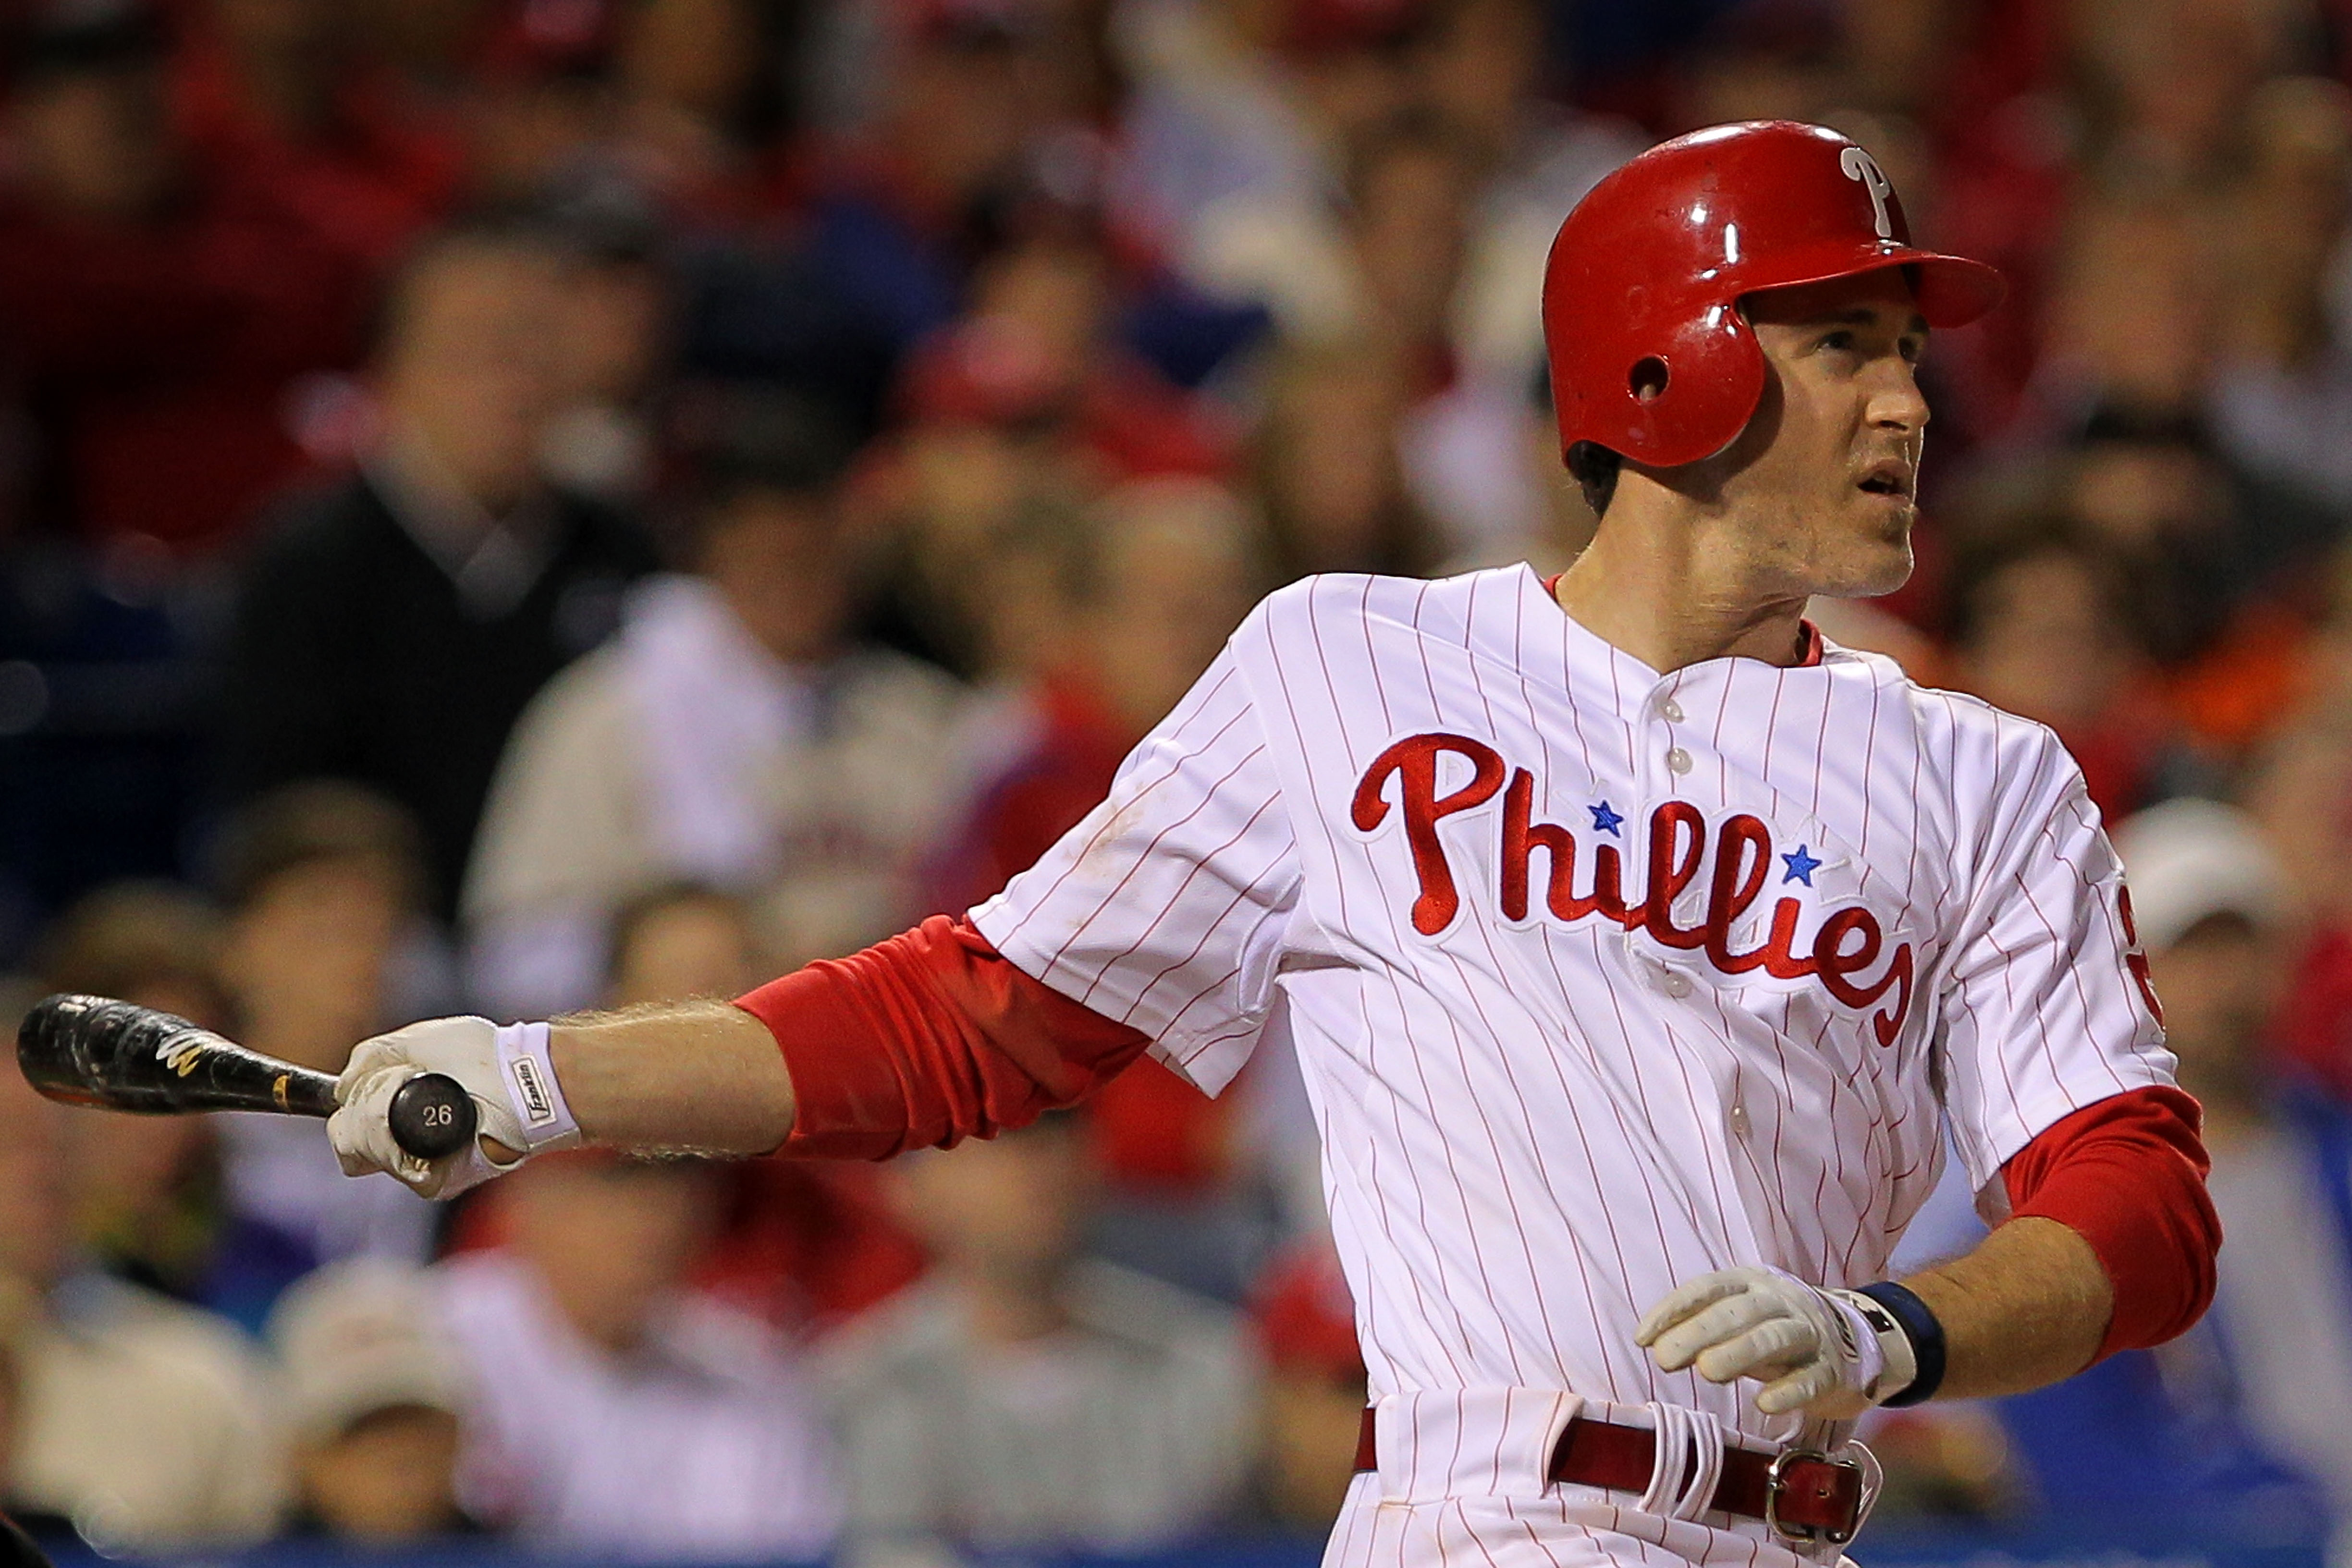 With Chase Utley's career concluded, his Hall of Fame case comes into focus   Phillies Nation - Your source for Philadelphia Phillies news, opinion,  history, rumors, events, and other fun stuff.